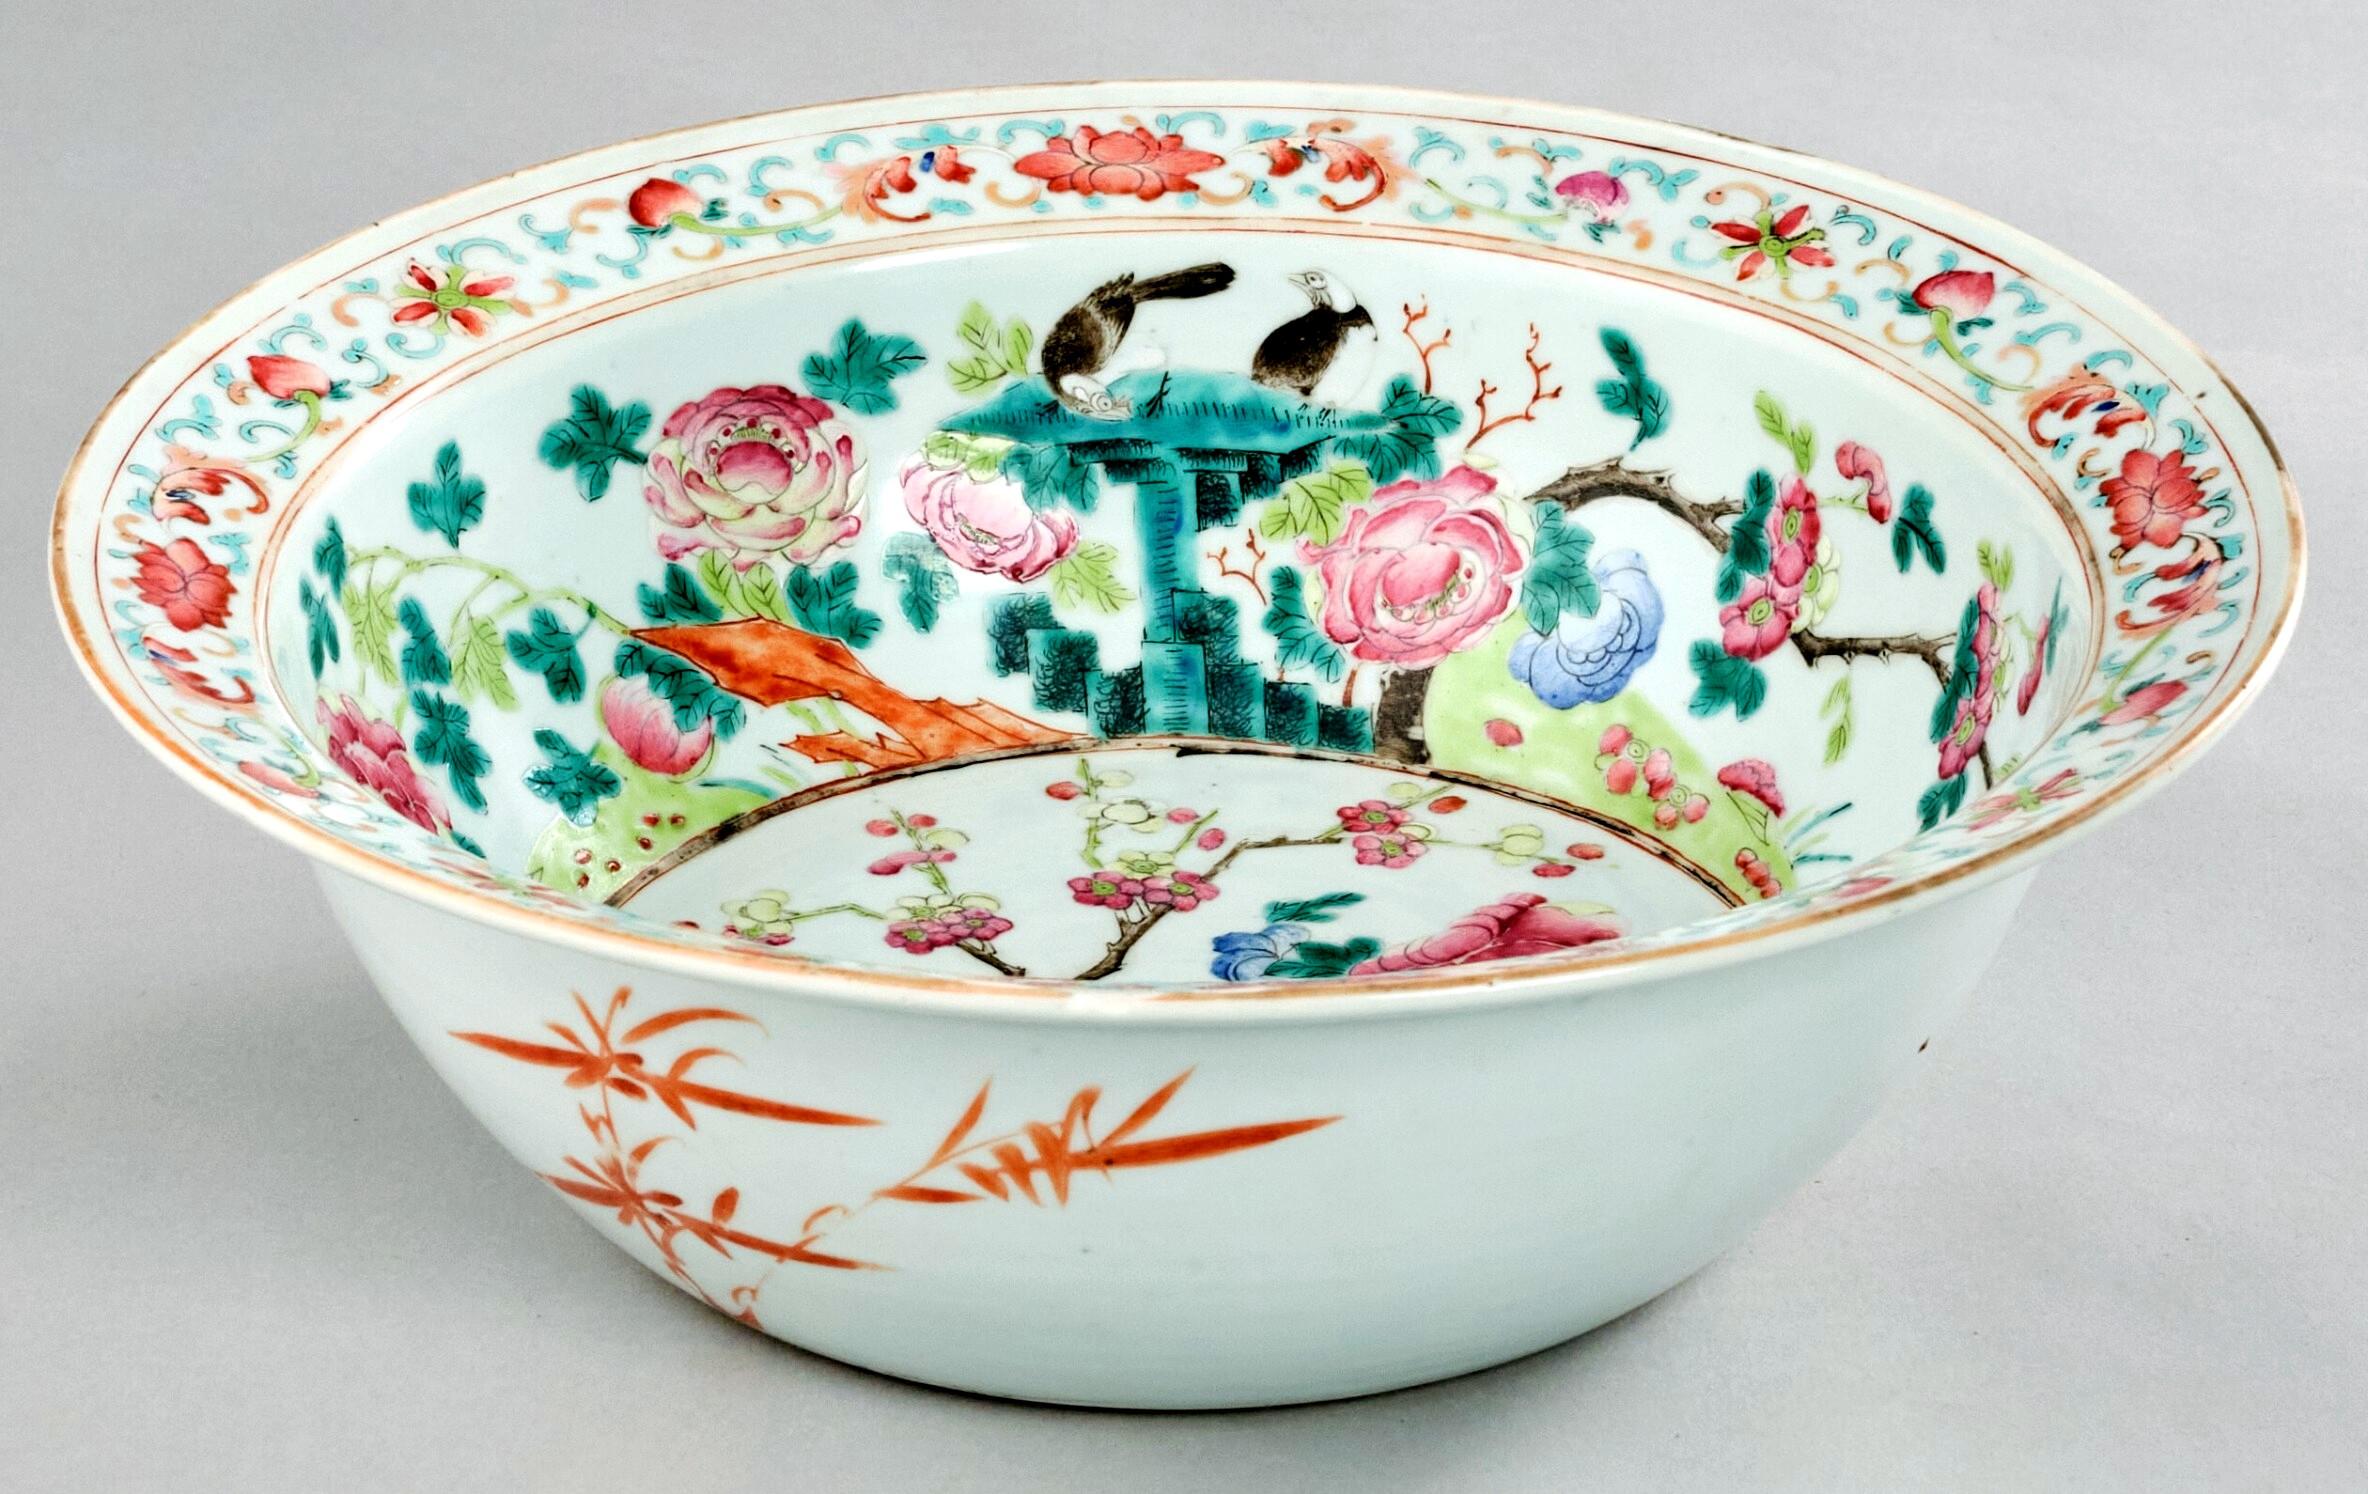 19th Century Chinese Famille Rose Enamelled Porcelain Basin, Qing Period In Good Condition For Sale In Ottawa, Ontario